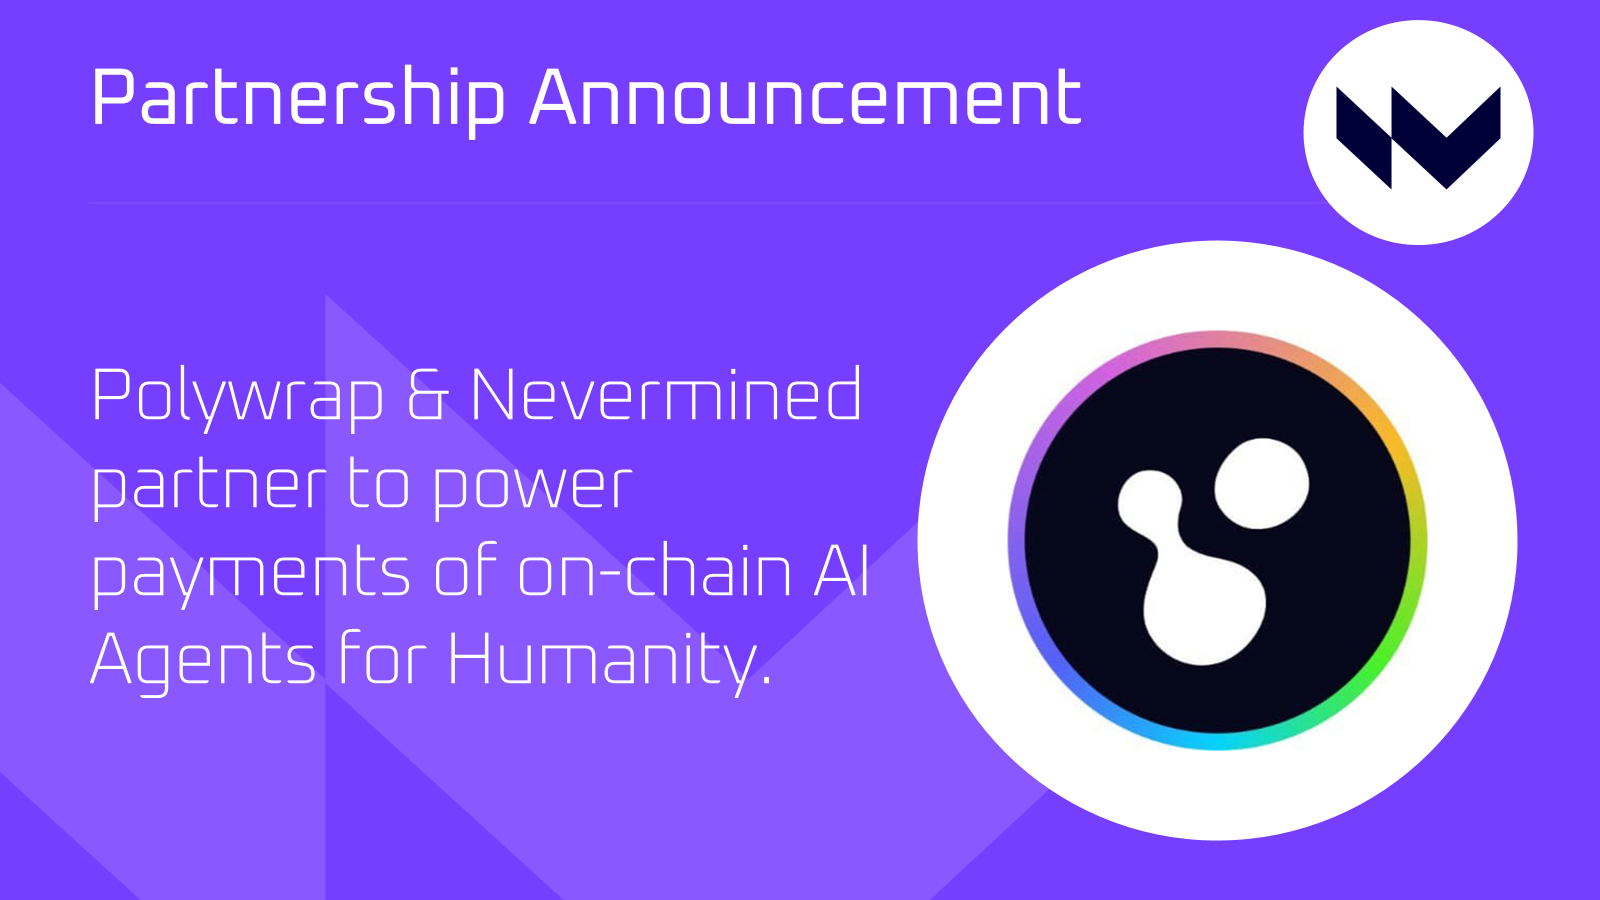 Partnership Announcement: Adding Nevermined Payments to power up Polywrap’s AI Agents &#038; serve Humanity